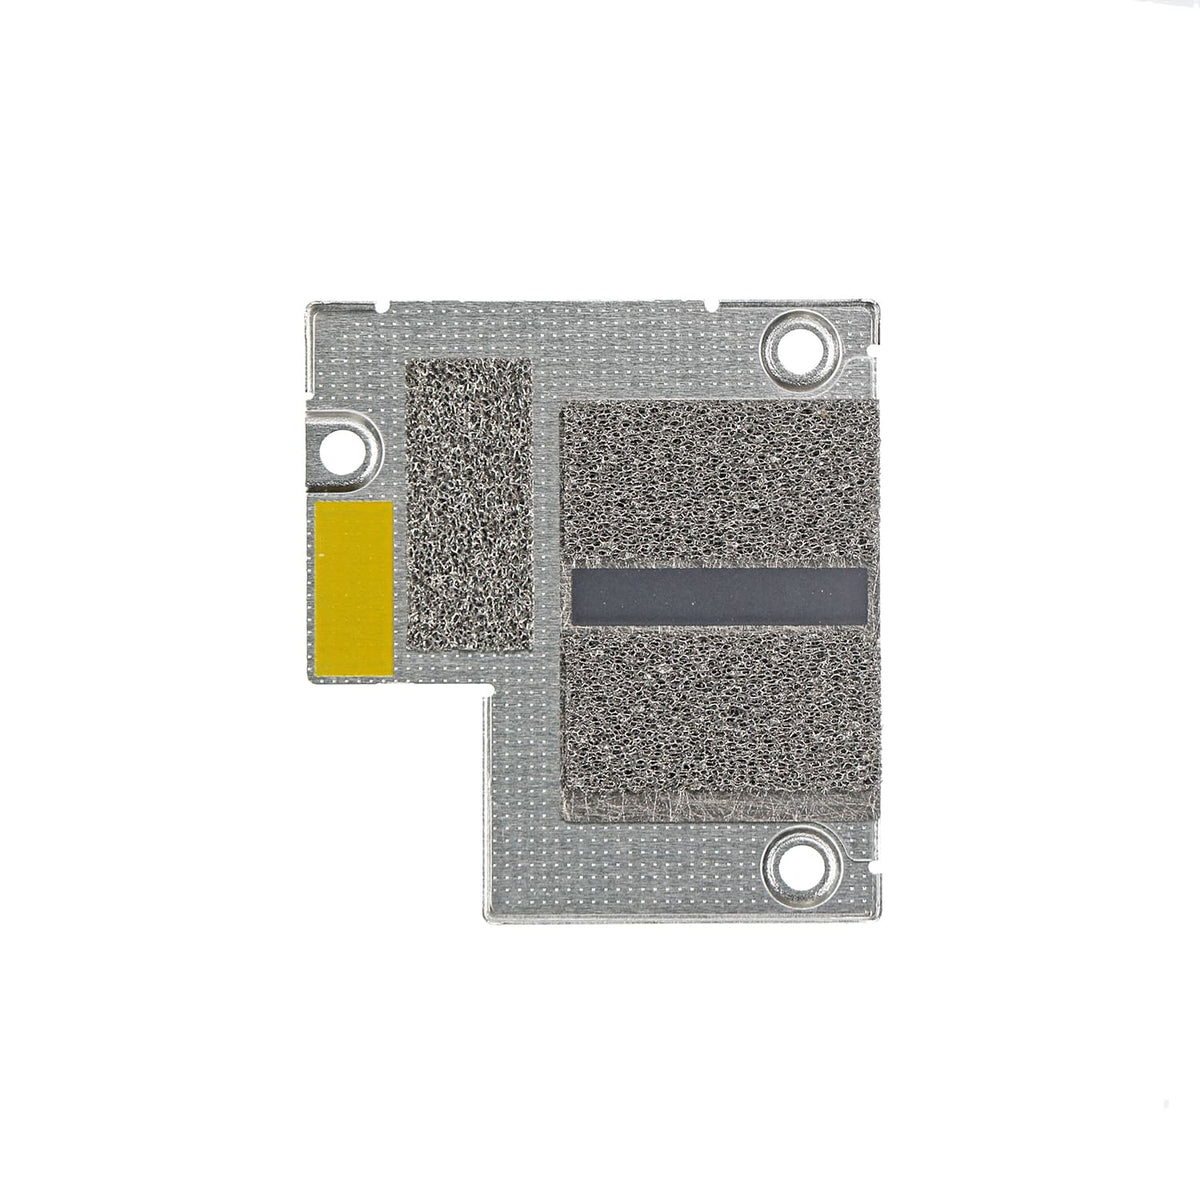 LCD PCB CONNECTOR RETAINING BRACKET FOR IPAD 7